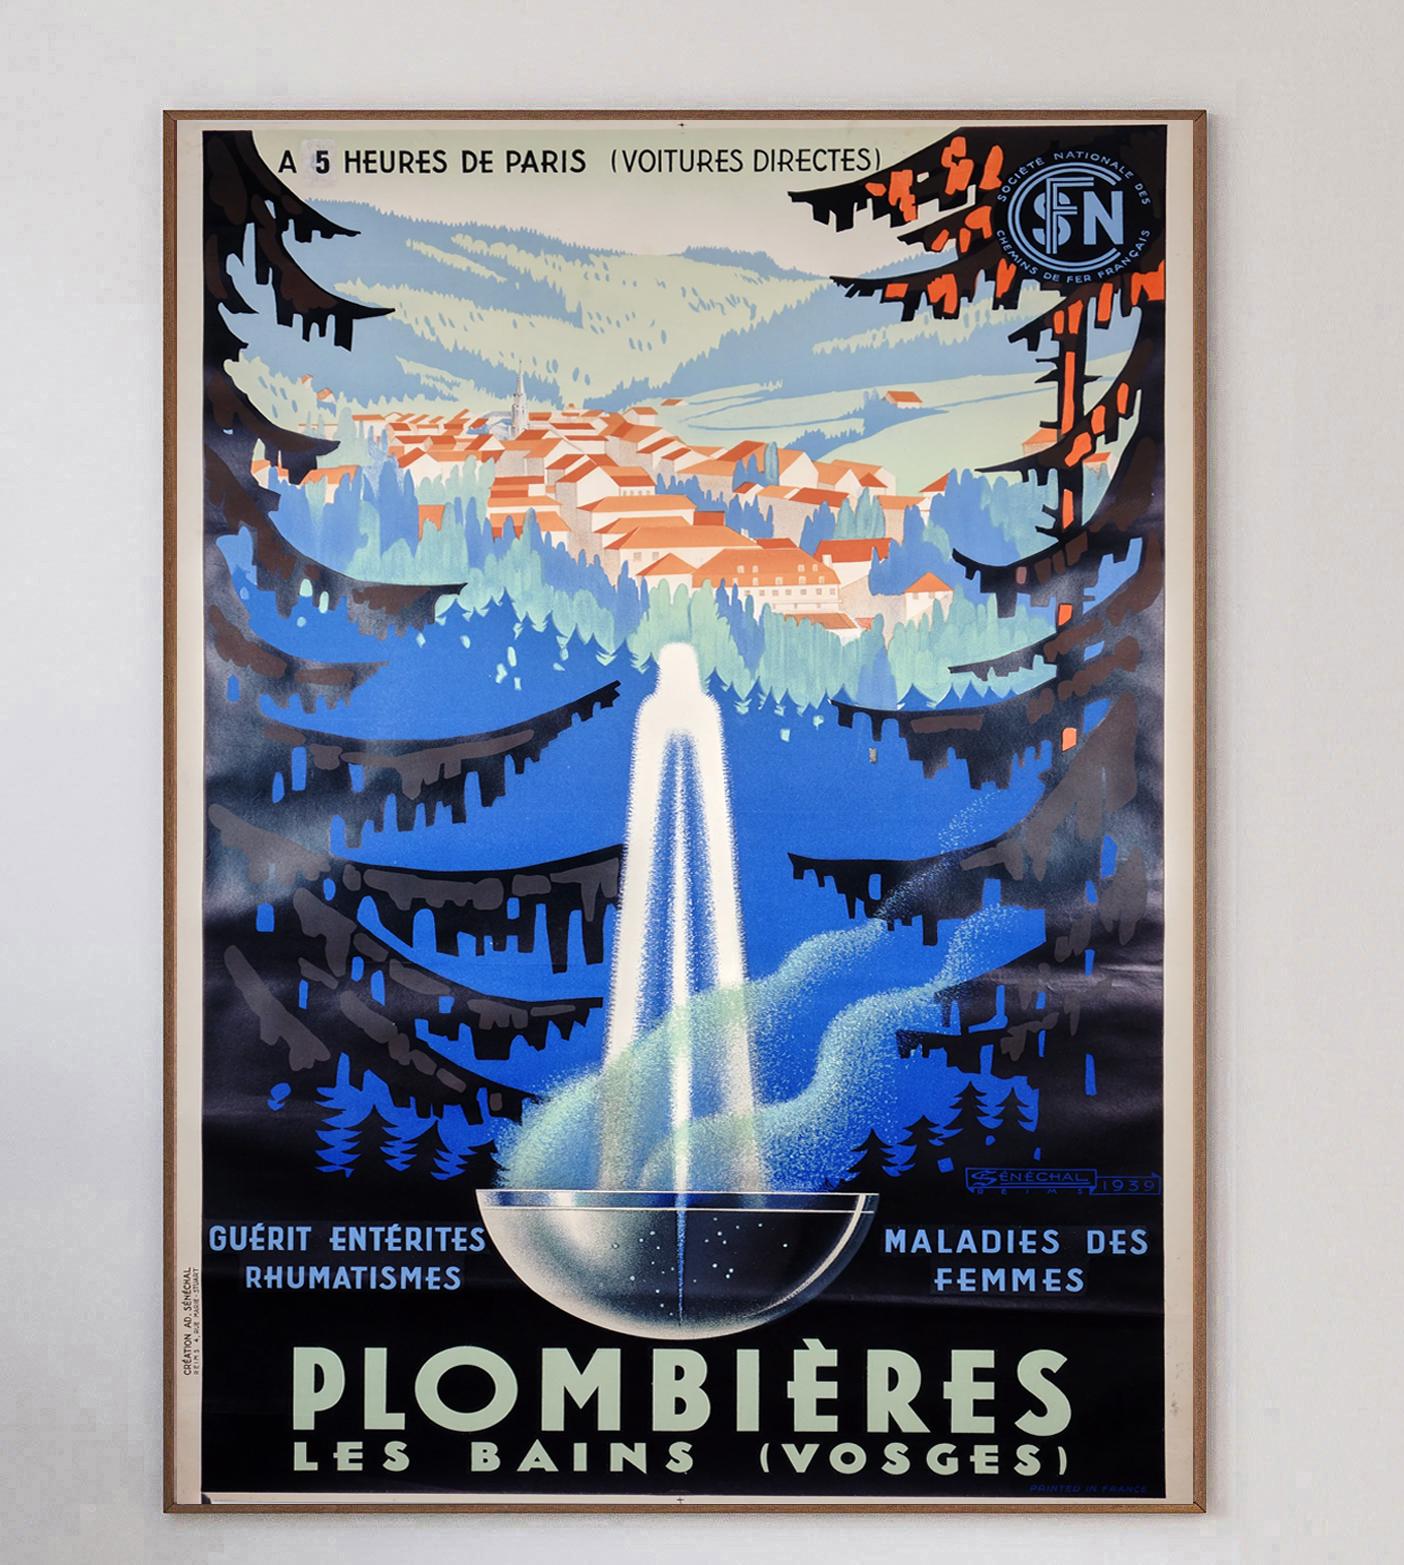 With artwork from French artist Adrien Senechal, this beautiful poster promotes the region of Plombieres-Les-Bains (Vosges) in eastern France. The area, famed for its natural hot baths was popular with visitors of all ages and this great design